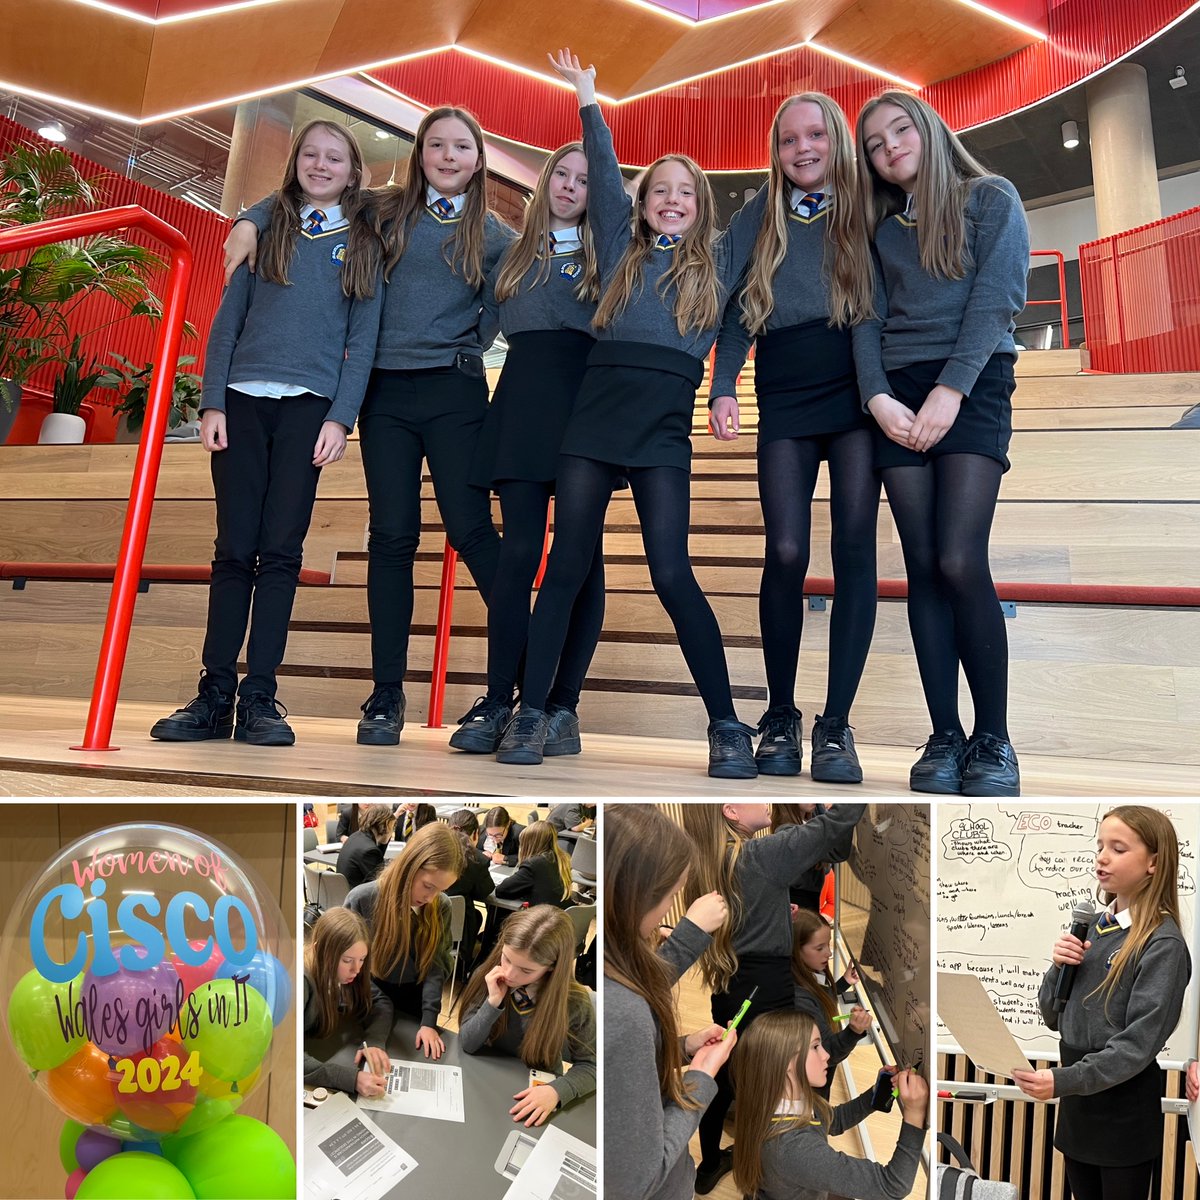 Llongyfarchiadau to our stellar Y7 #WhitchurchHS students🌟 They rocked the 'CISCO Girls in IT' Day at Cardiff University, winning hearts with their innovation and brilliance! 💻🌱 #STEM #GirlsinTech